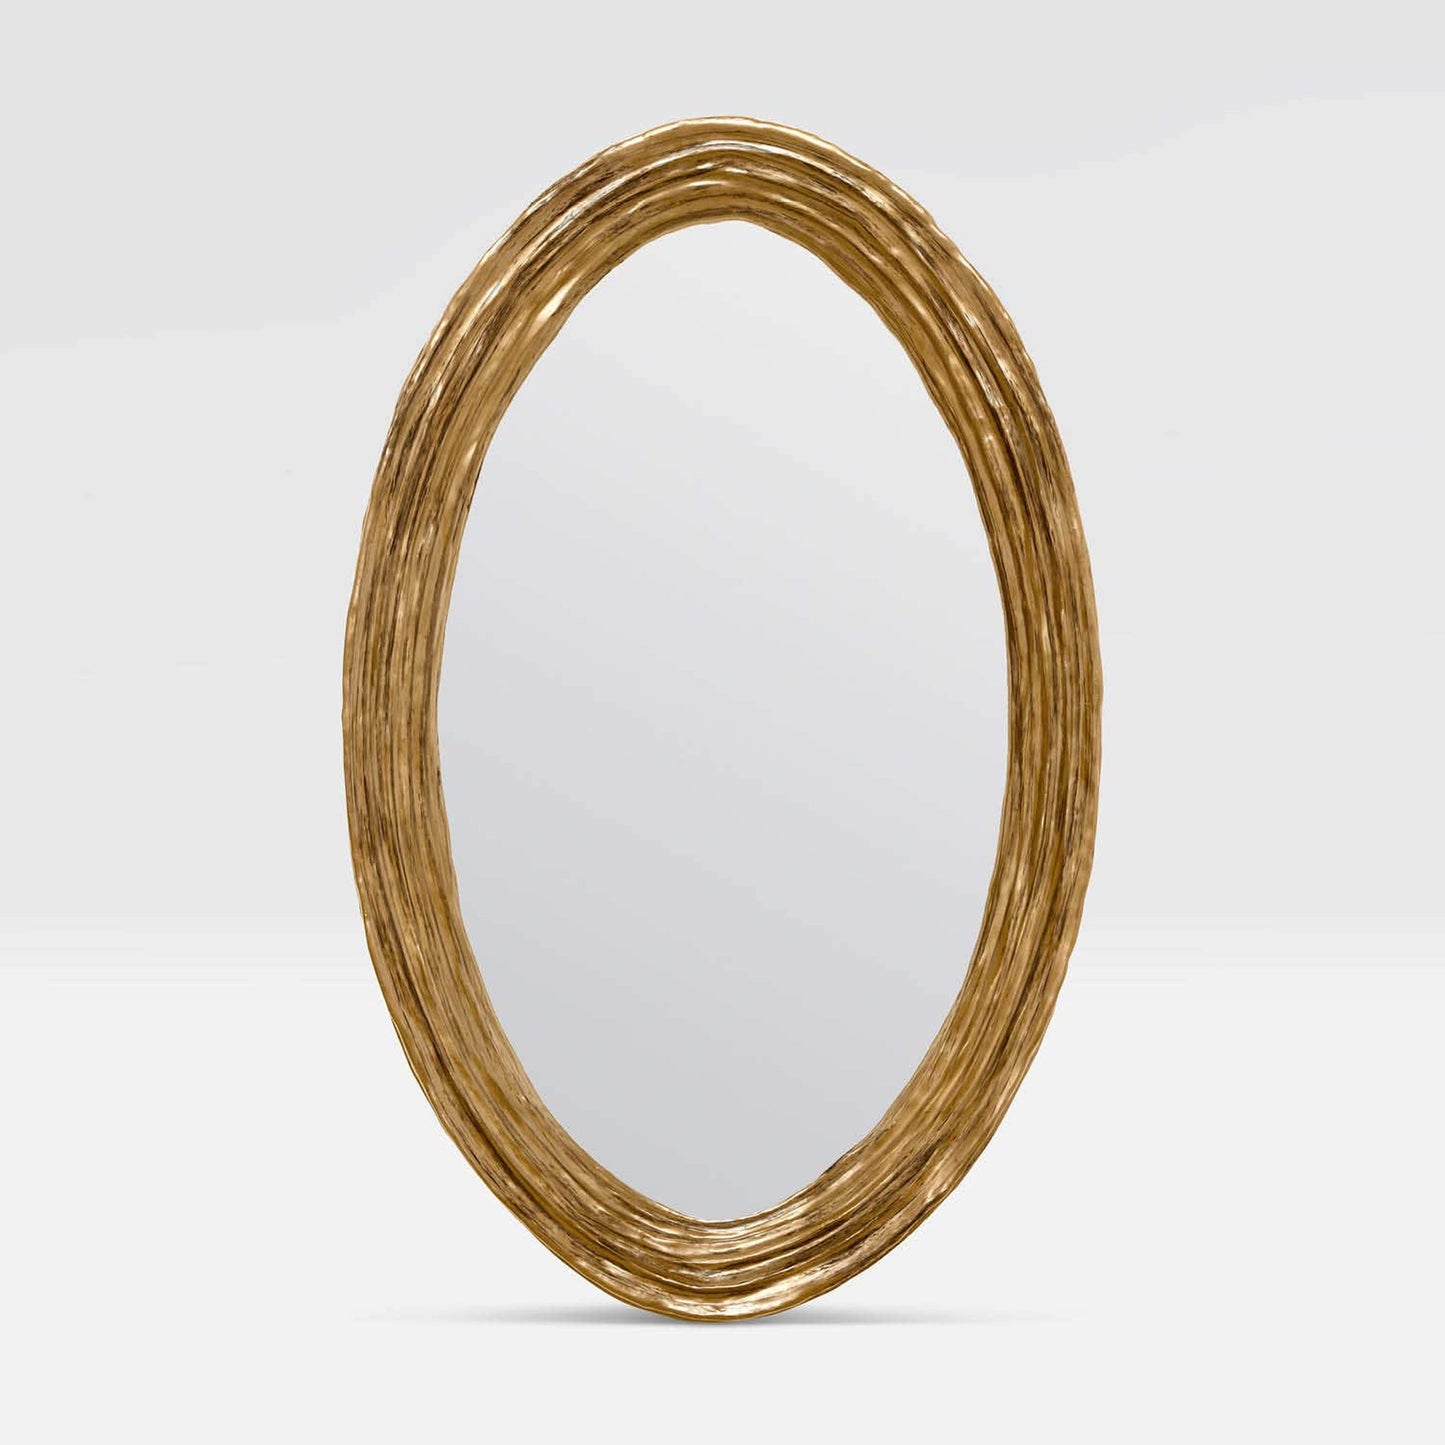 Made Goods Hetty 30" x 47" Oval Antiqued Gold Leaf Resin Mirror